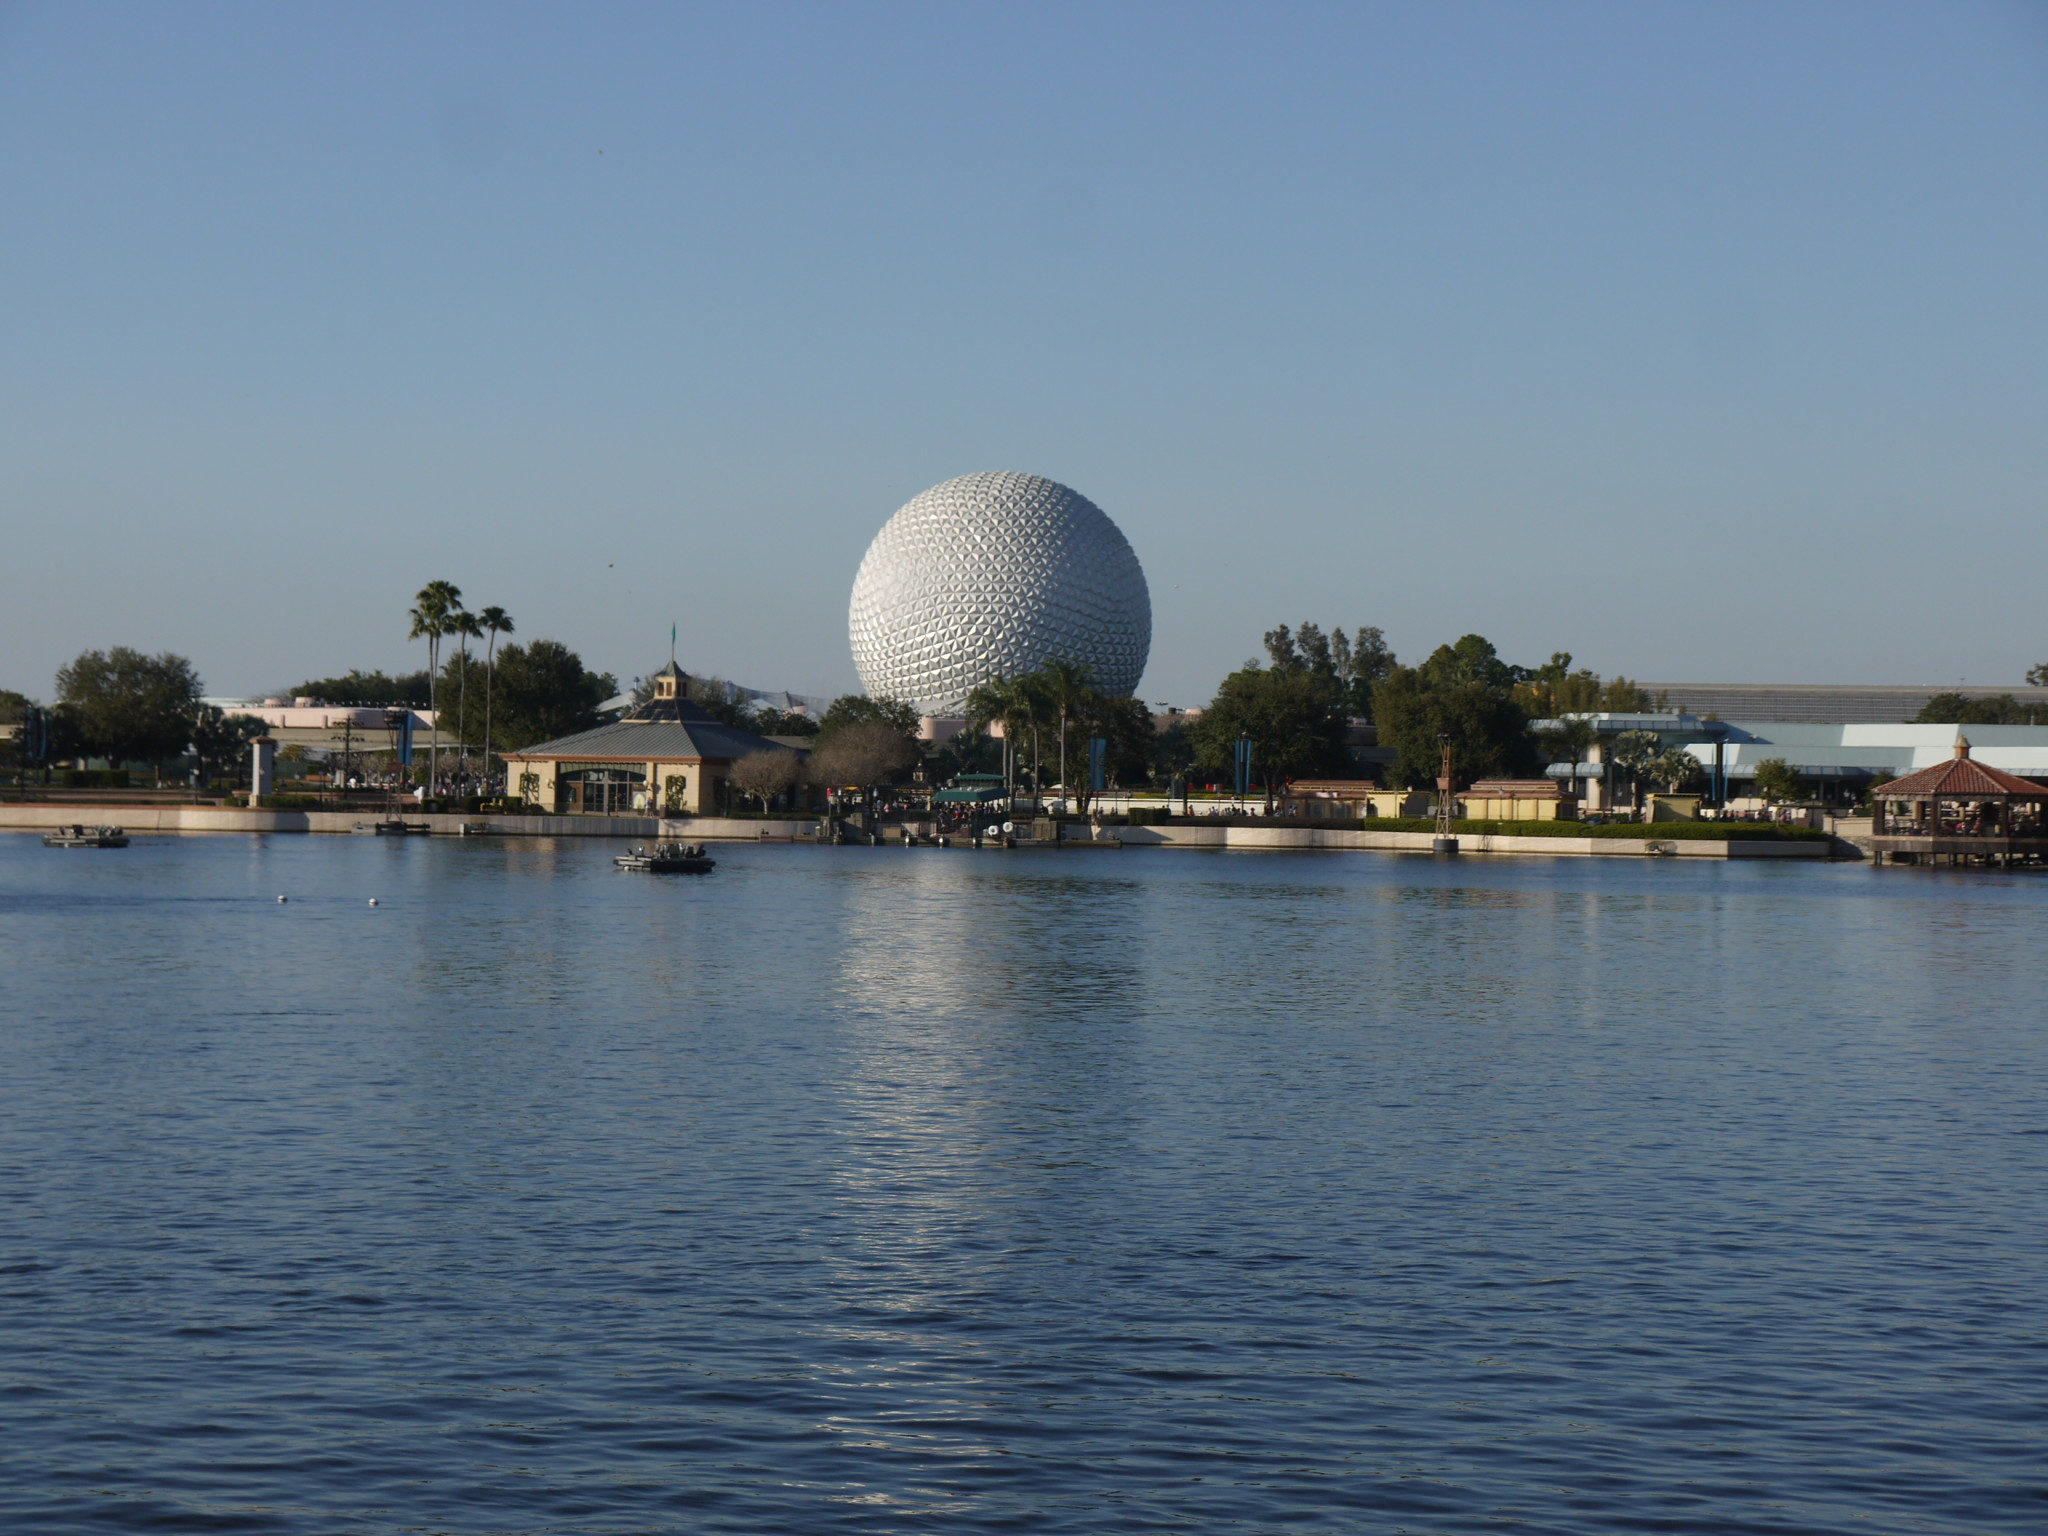 Documents Filed for an Epcot’s Frozen Expansion